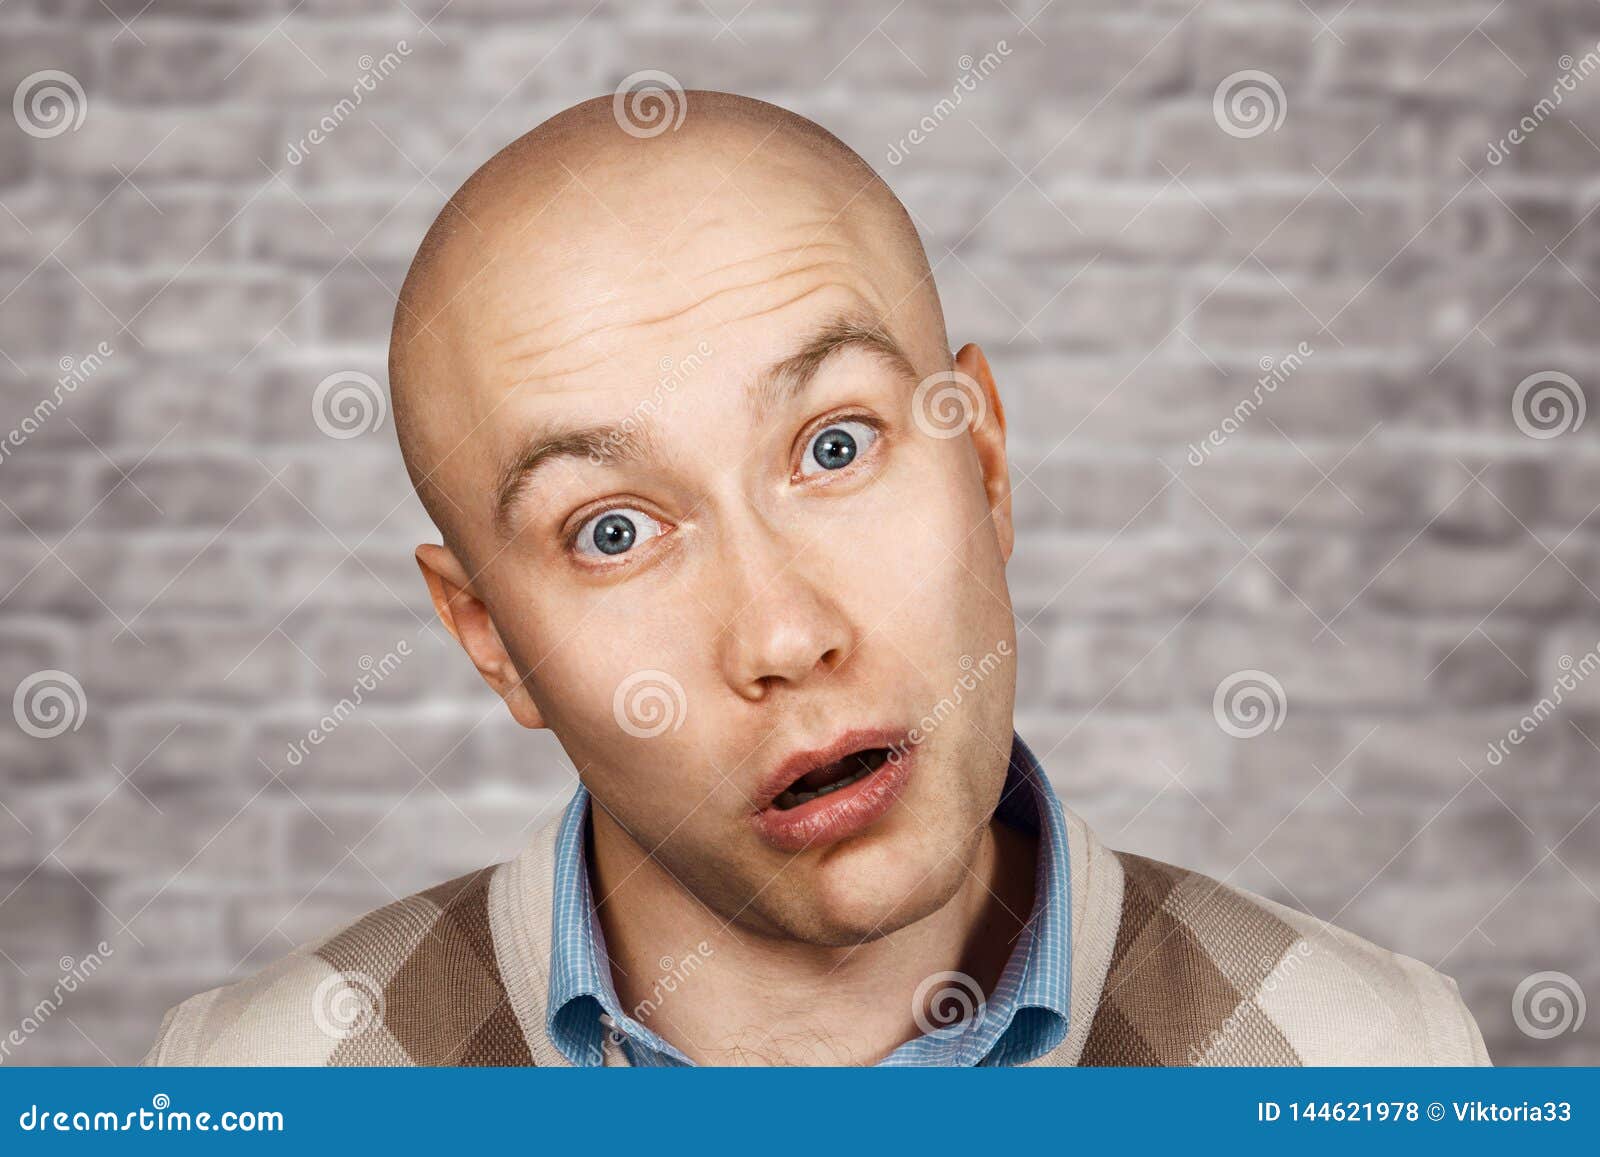 portrait of a bald stupid surprised guy with open mouth on an brick wall background